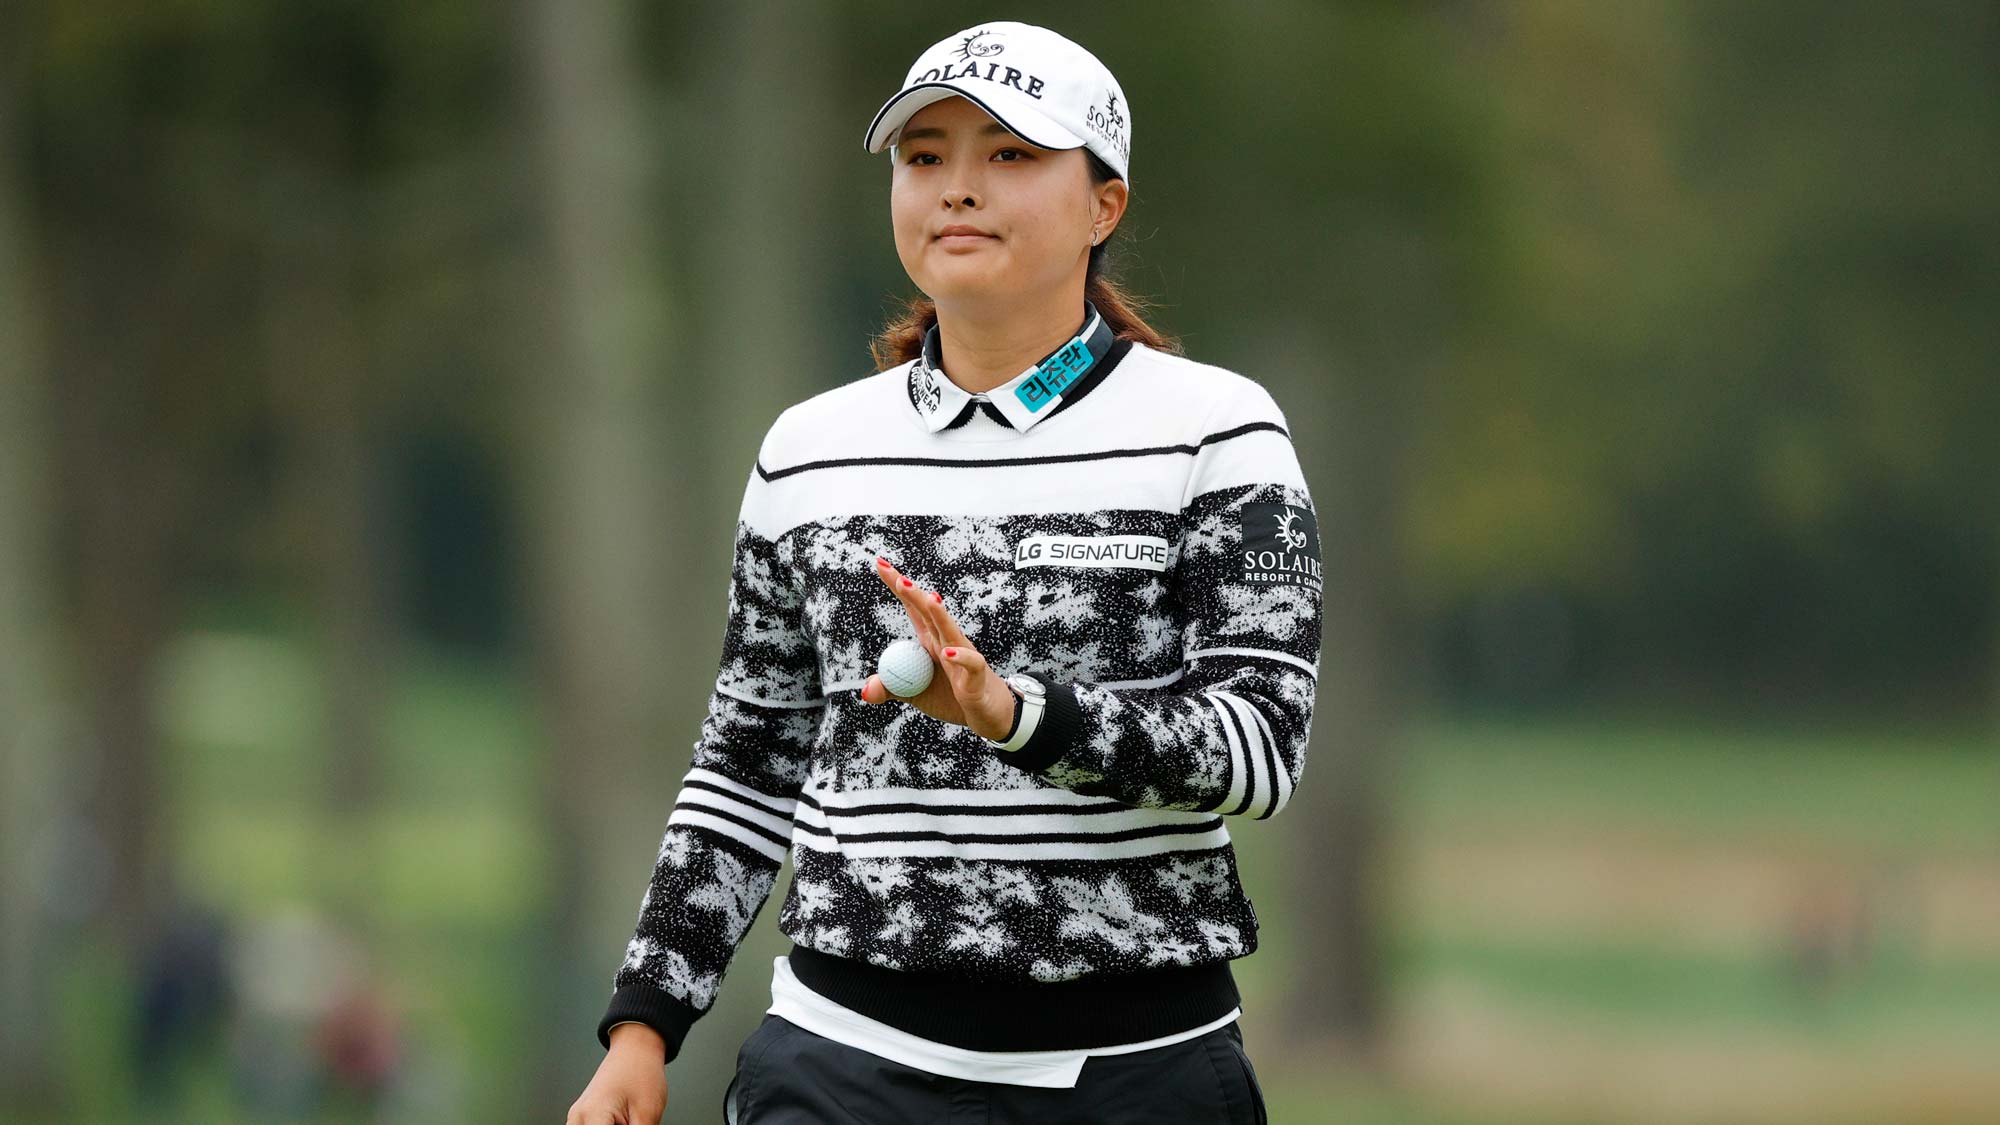 Jin Young Ko of Korea reacts after a putt on the 5th hole during the final round of the Cognizant Founders Cup